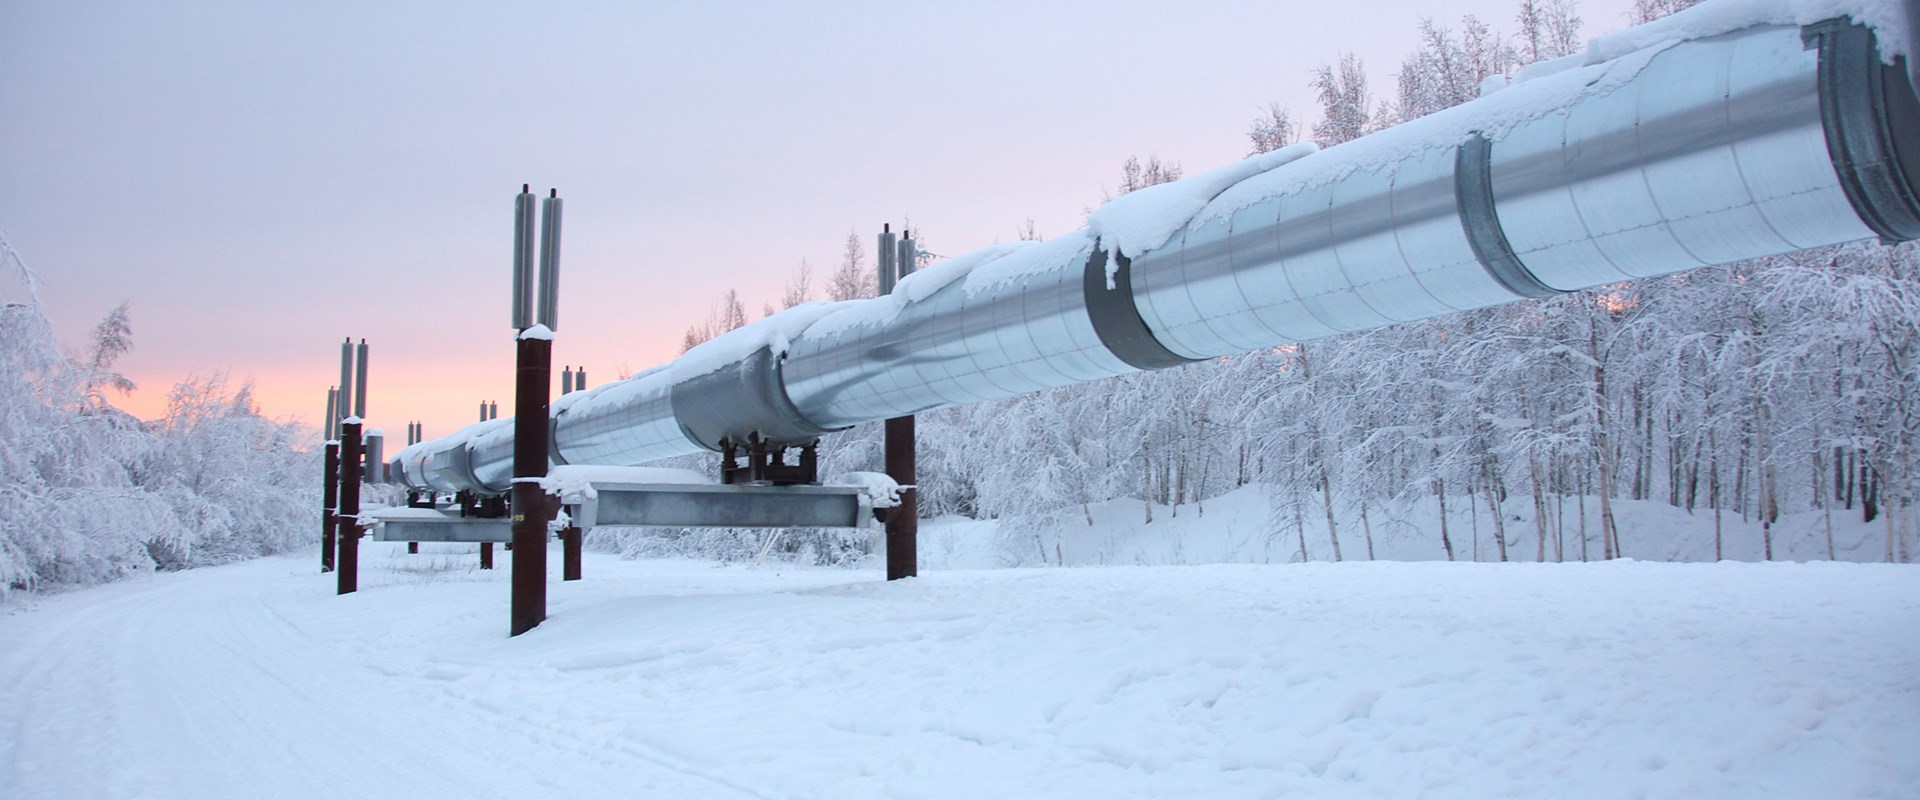 Pipeline in snowy environment